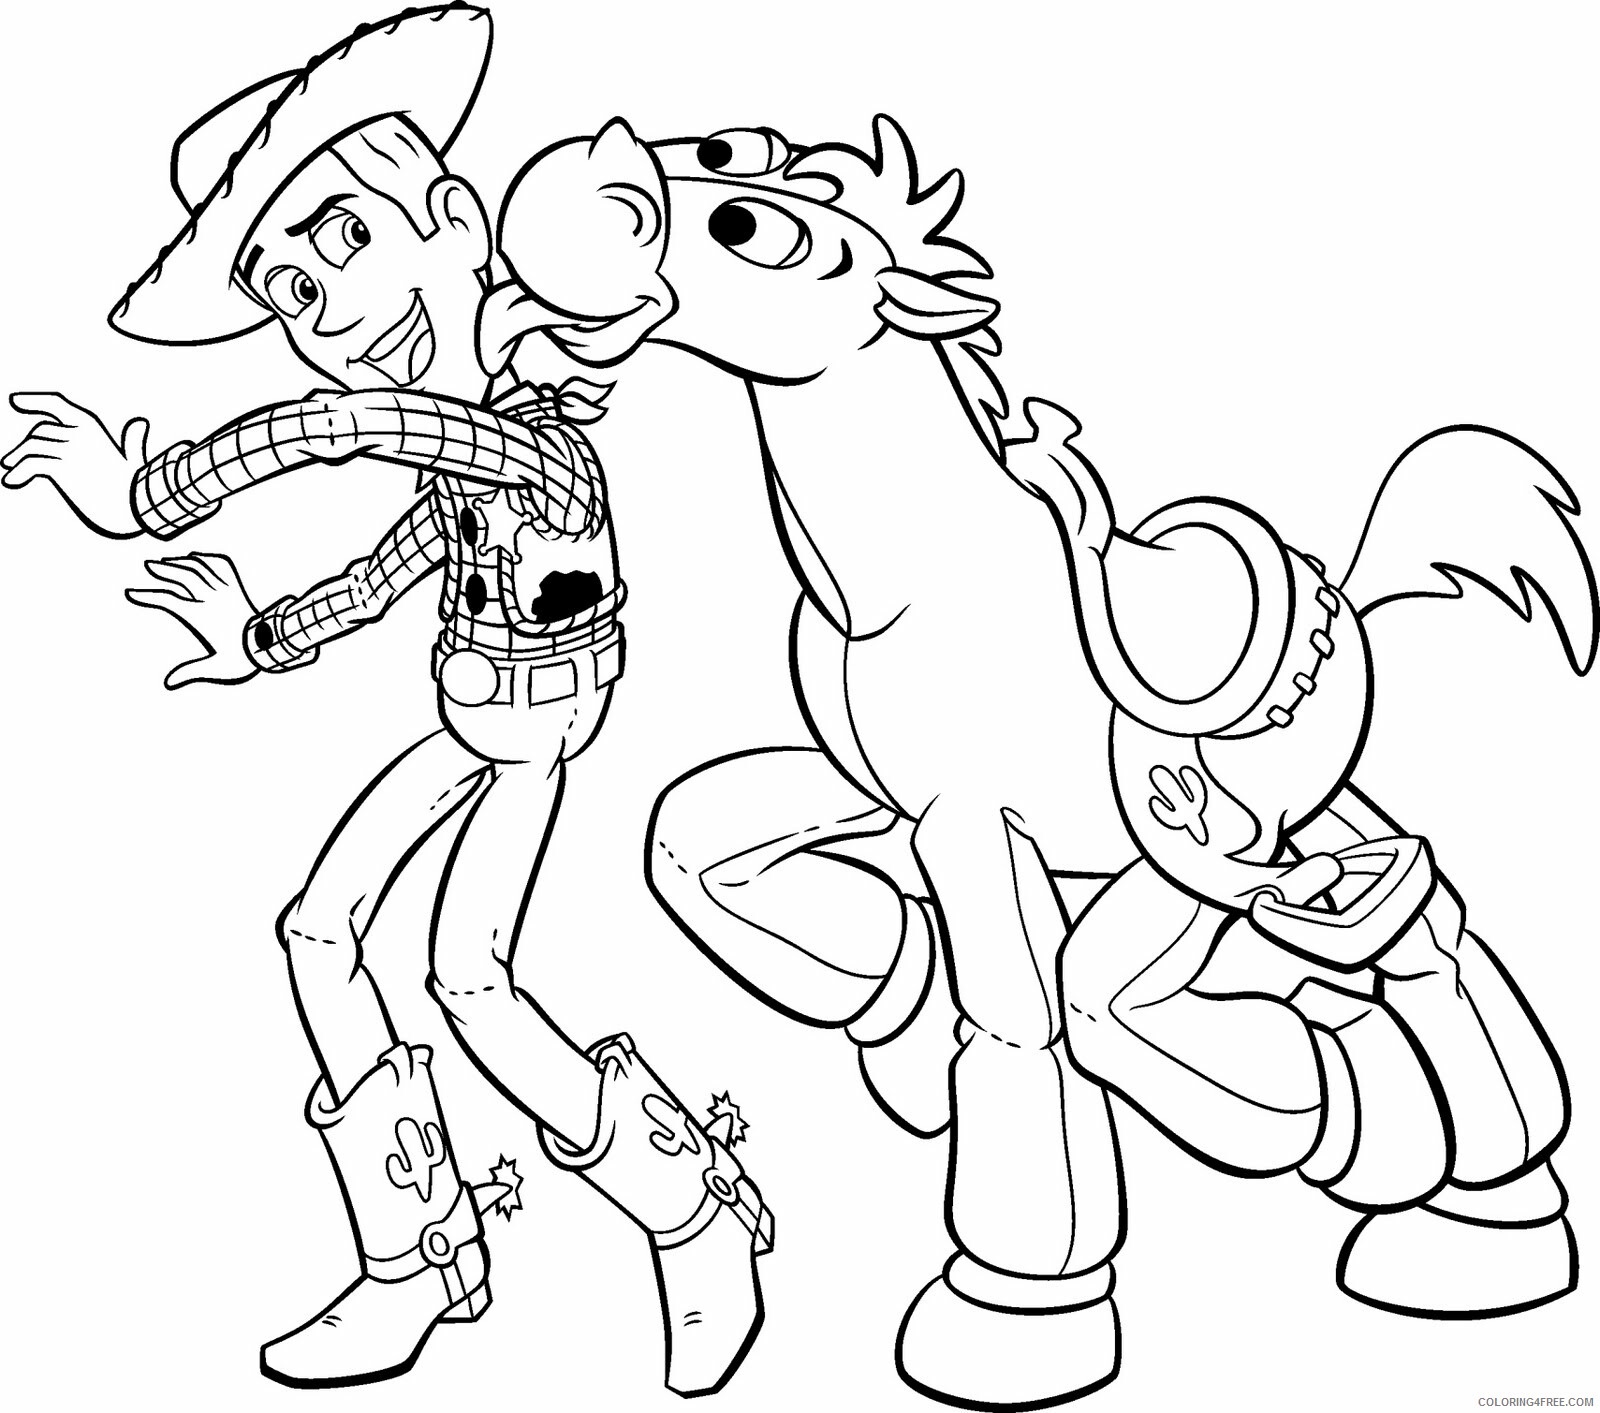 Toy Story Coloring Pages TV Film toy story woody bullseye Printable 2020 10527 Coloring4free